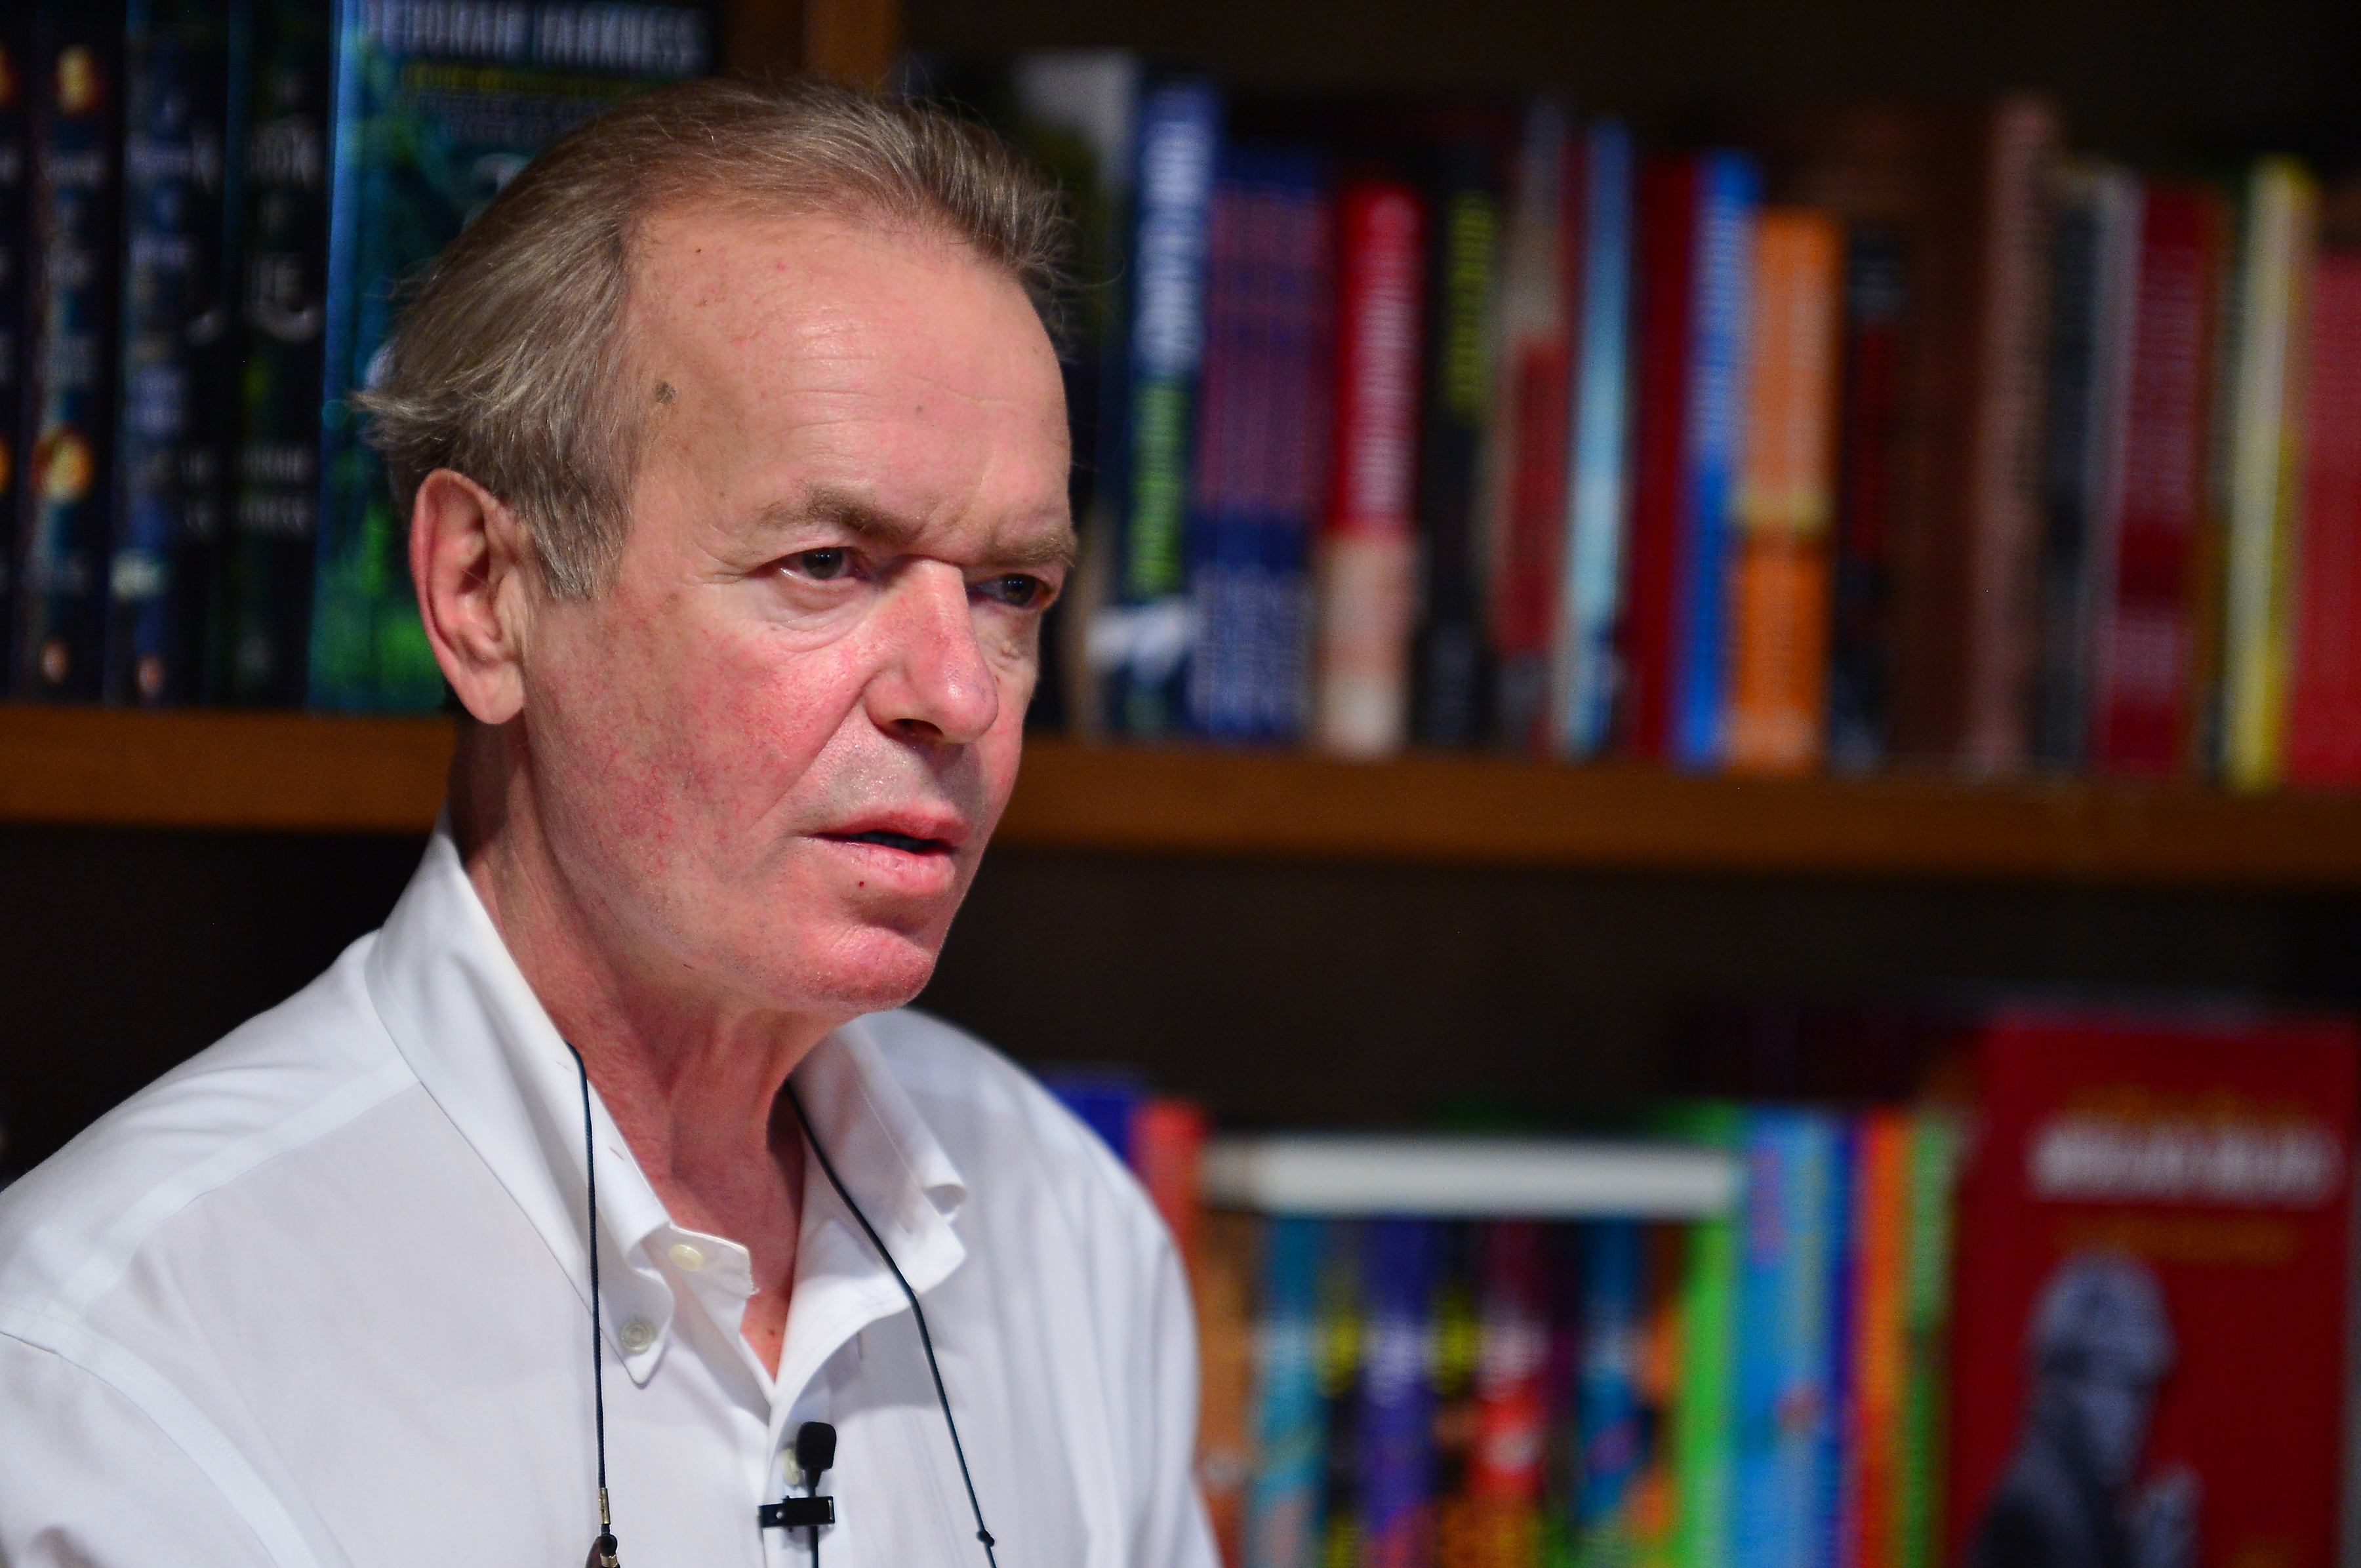 Martin Amis has died at age 73 after a battle with oesophageal cancer